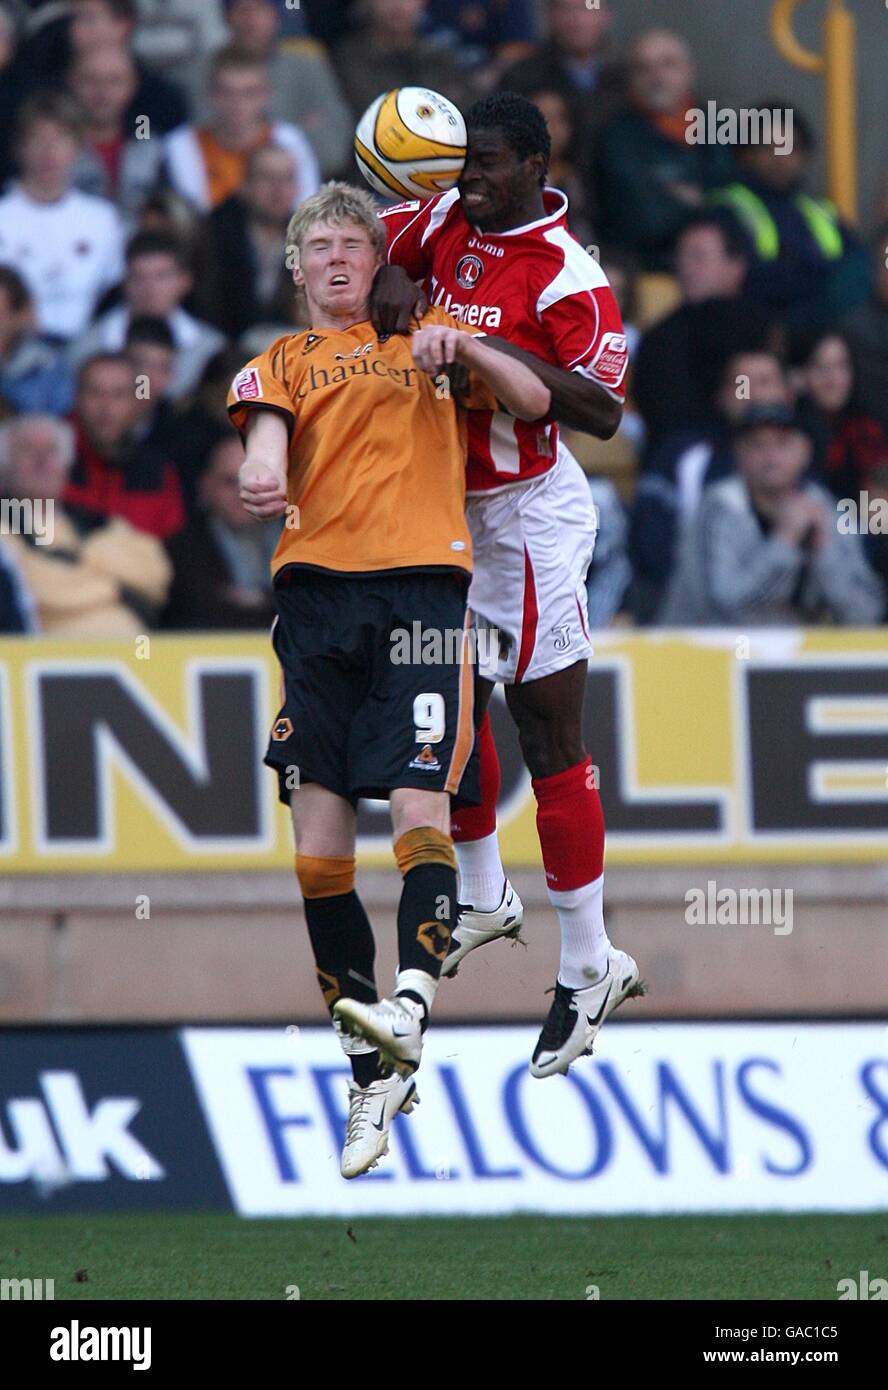 Soccer - Coca-Cola Football League Championship - Wolverhampton Wanderers v Charlton Athletic - Molineux Stadium. Wolverhampton Wanderers' Andrew Keogh (l) and Charlton Athletic's Sam Sodje (r) battle for the ball Stock Photo